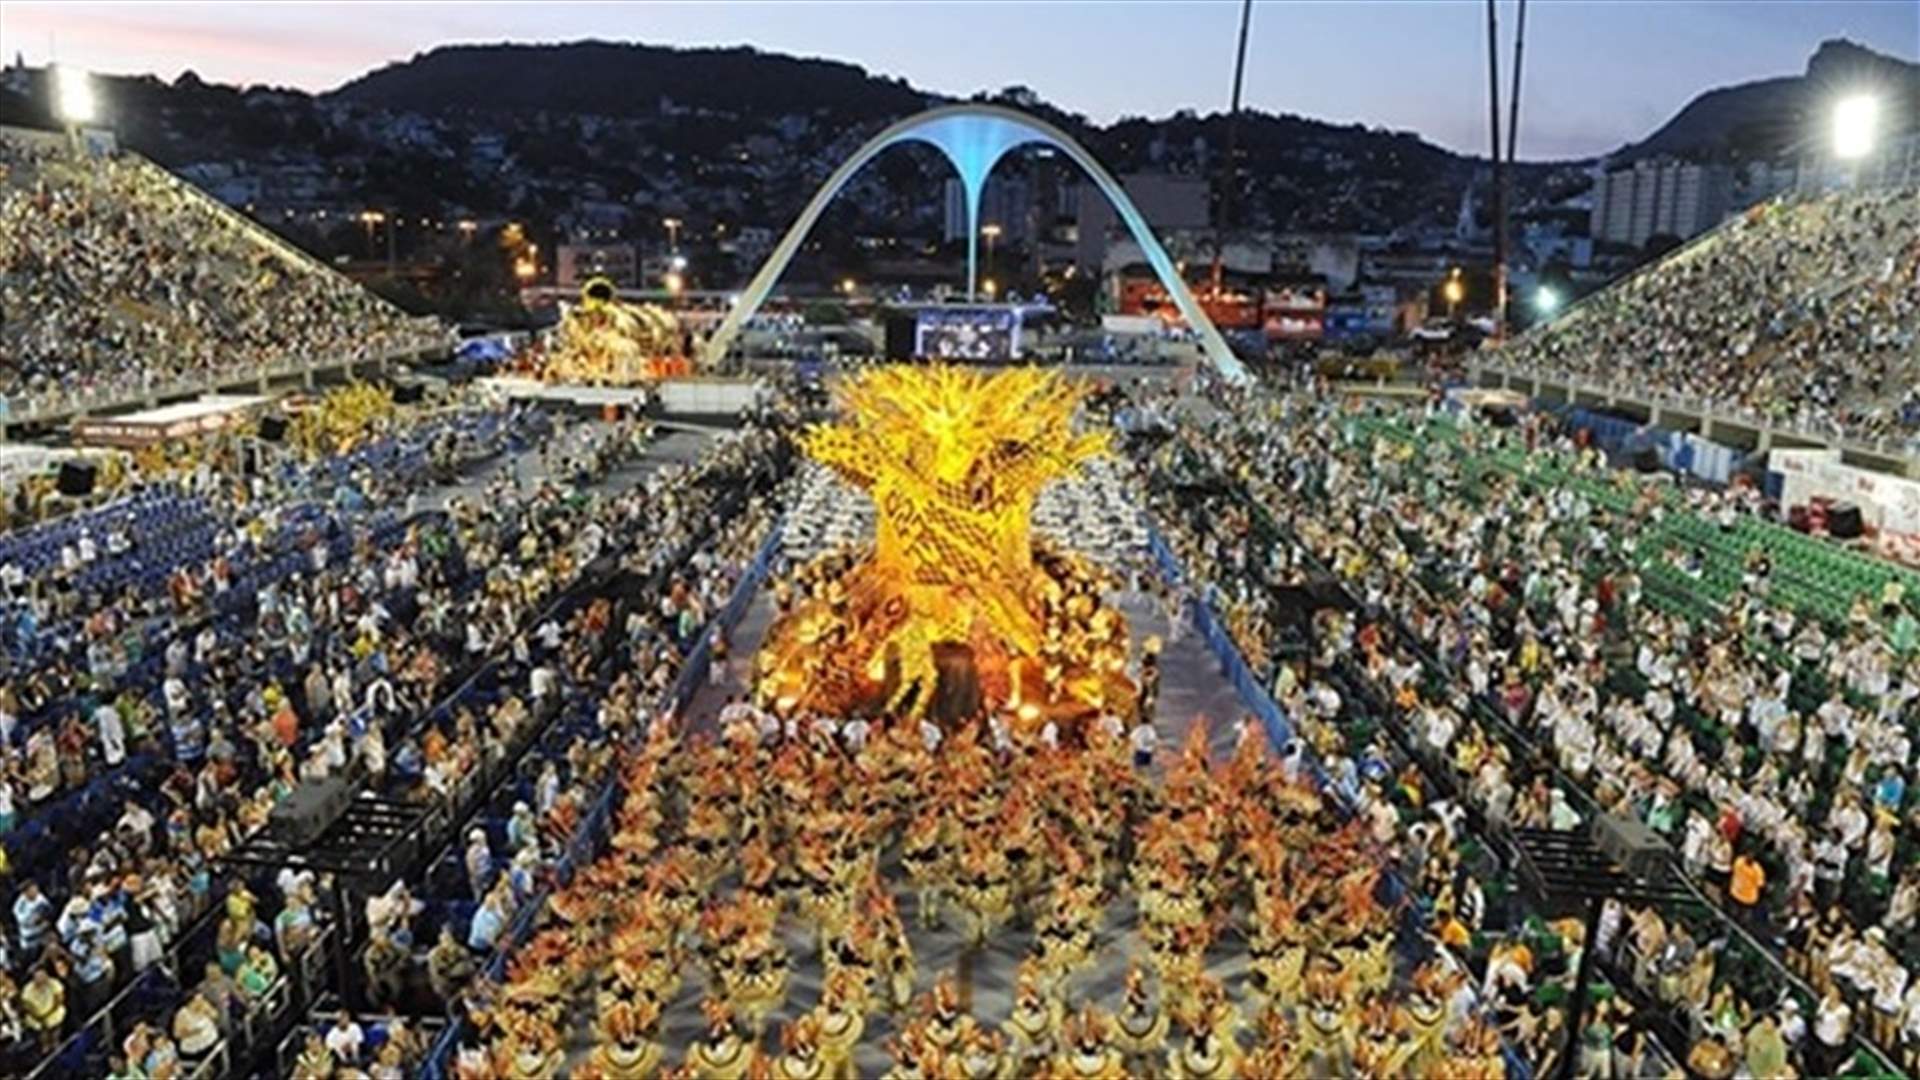 Lebanon for the first time in the Brazilian Carnival